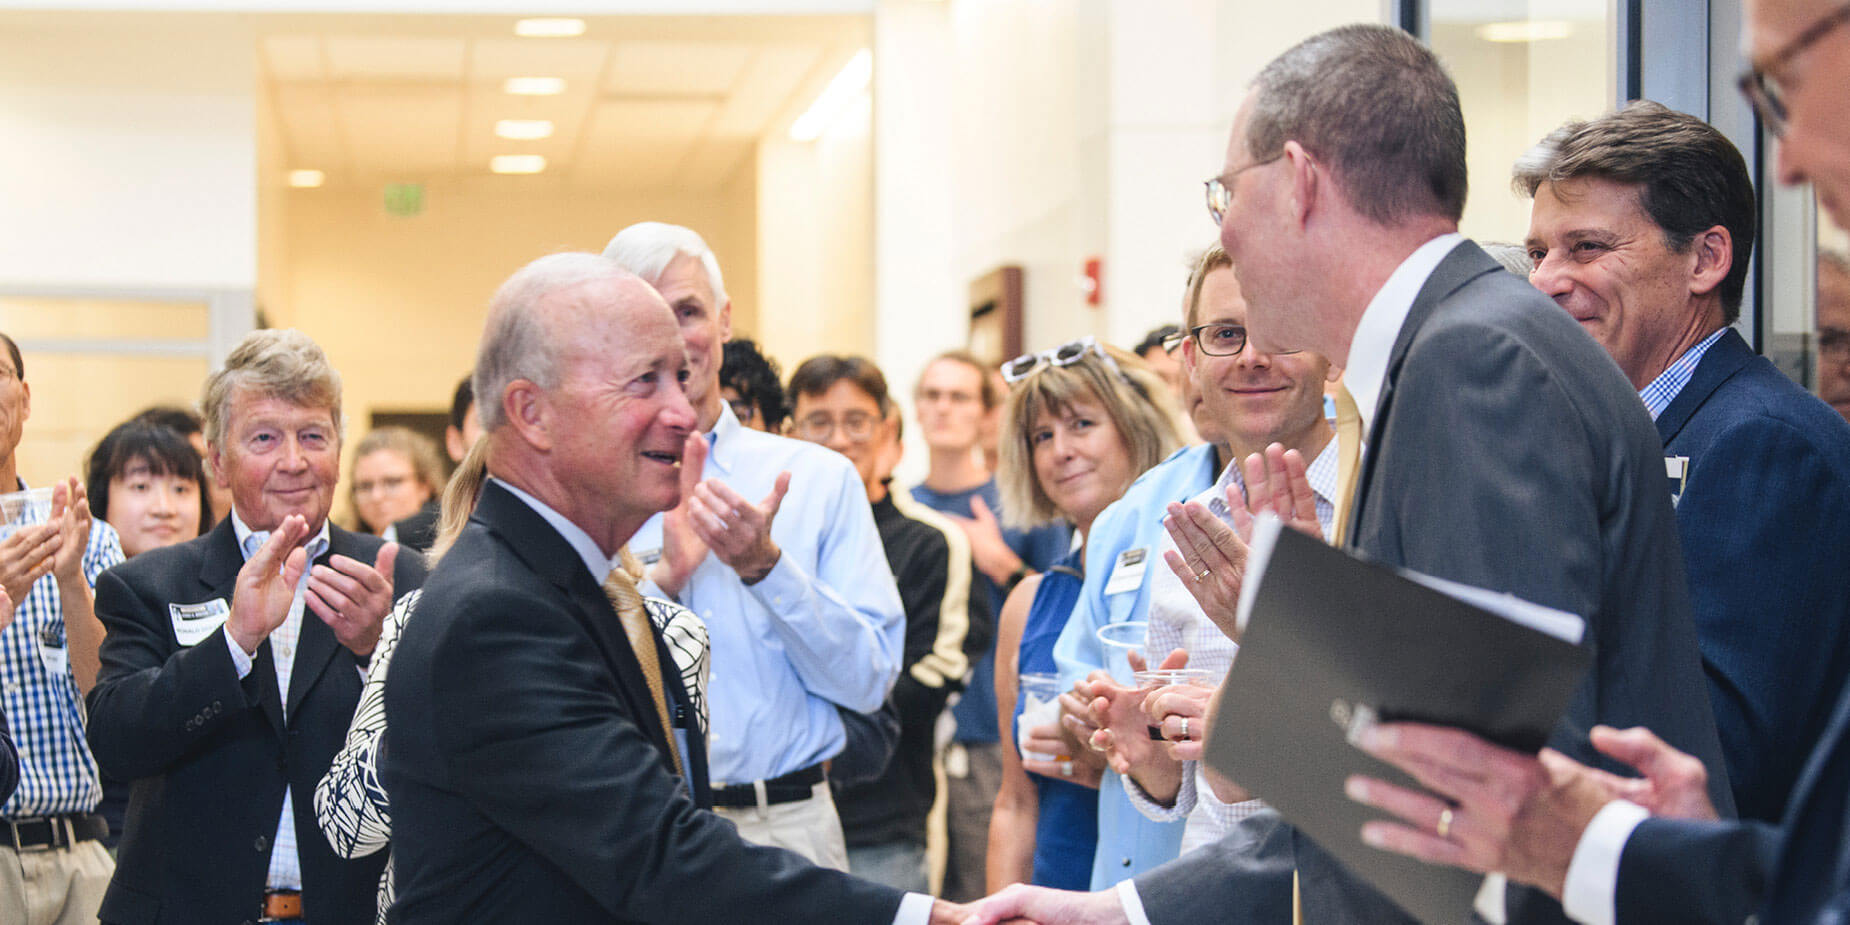 Mitch Daniels and George Wodicka shake hands at the Sept. 9 event.